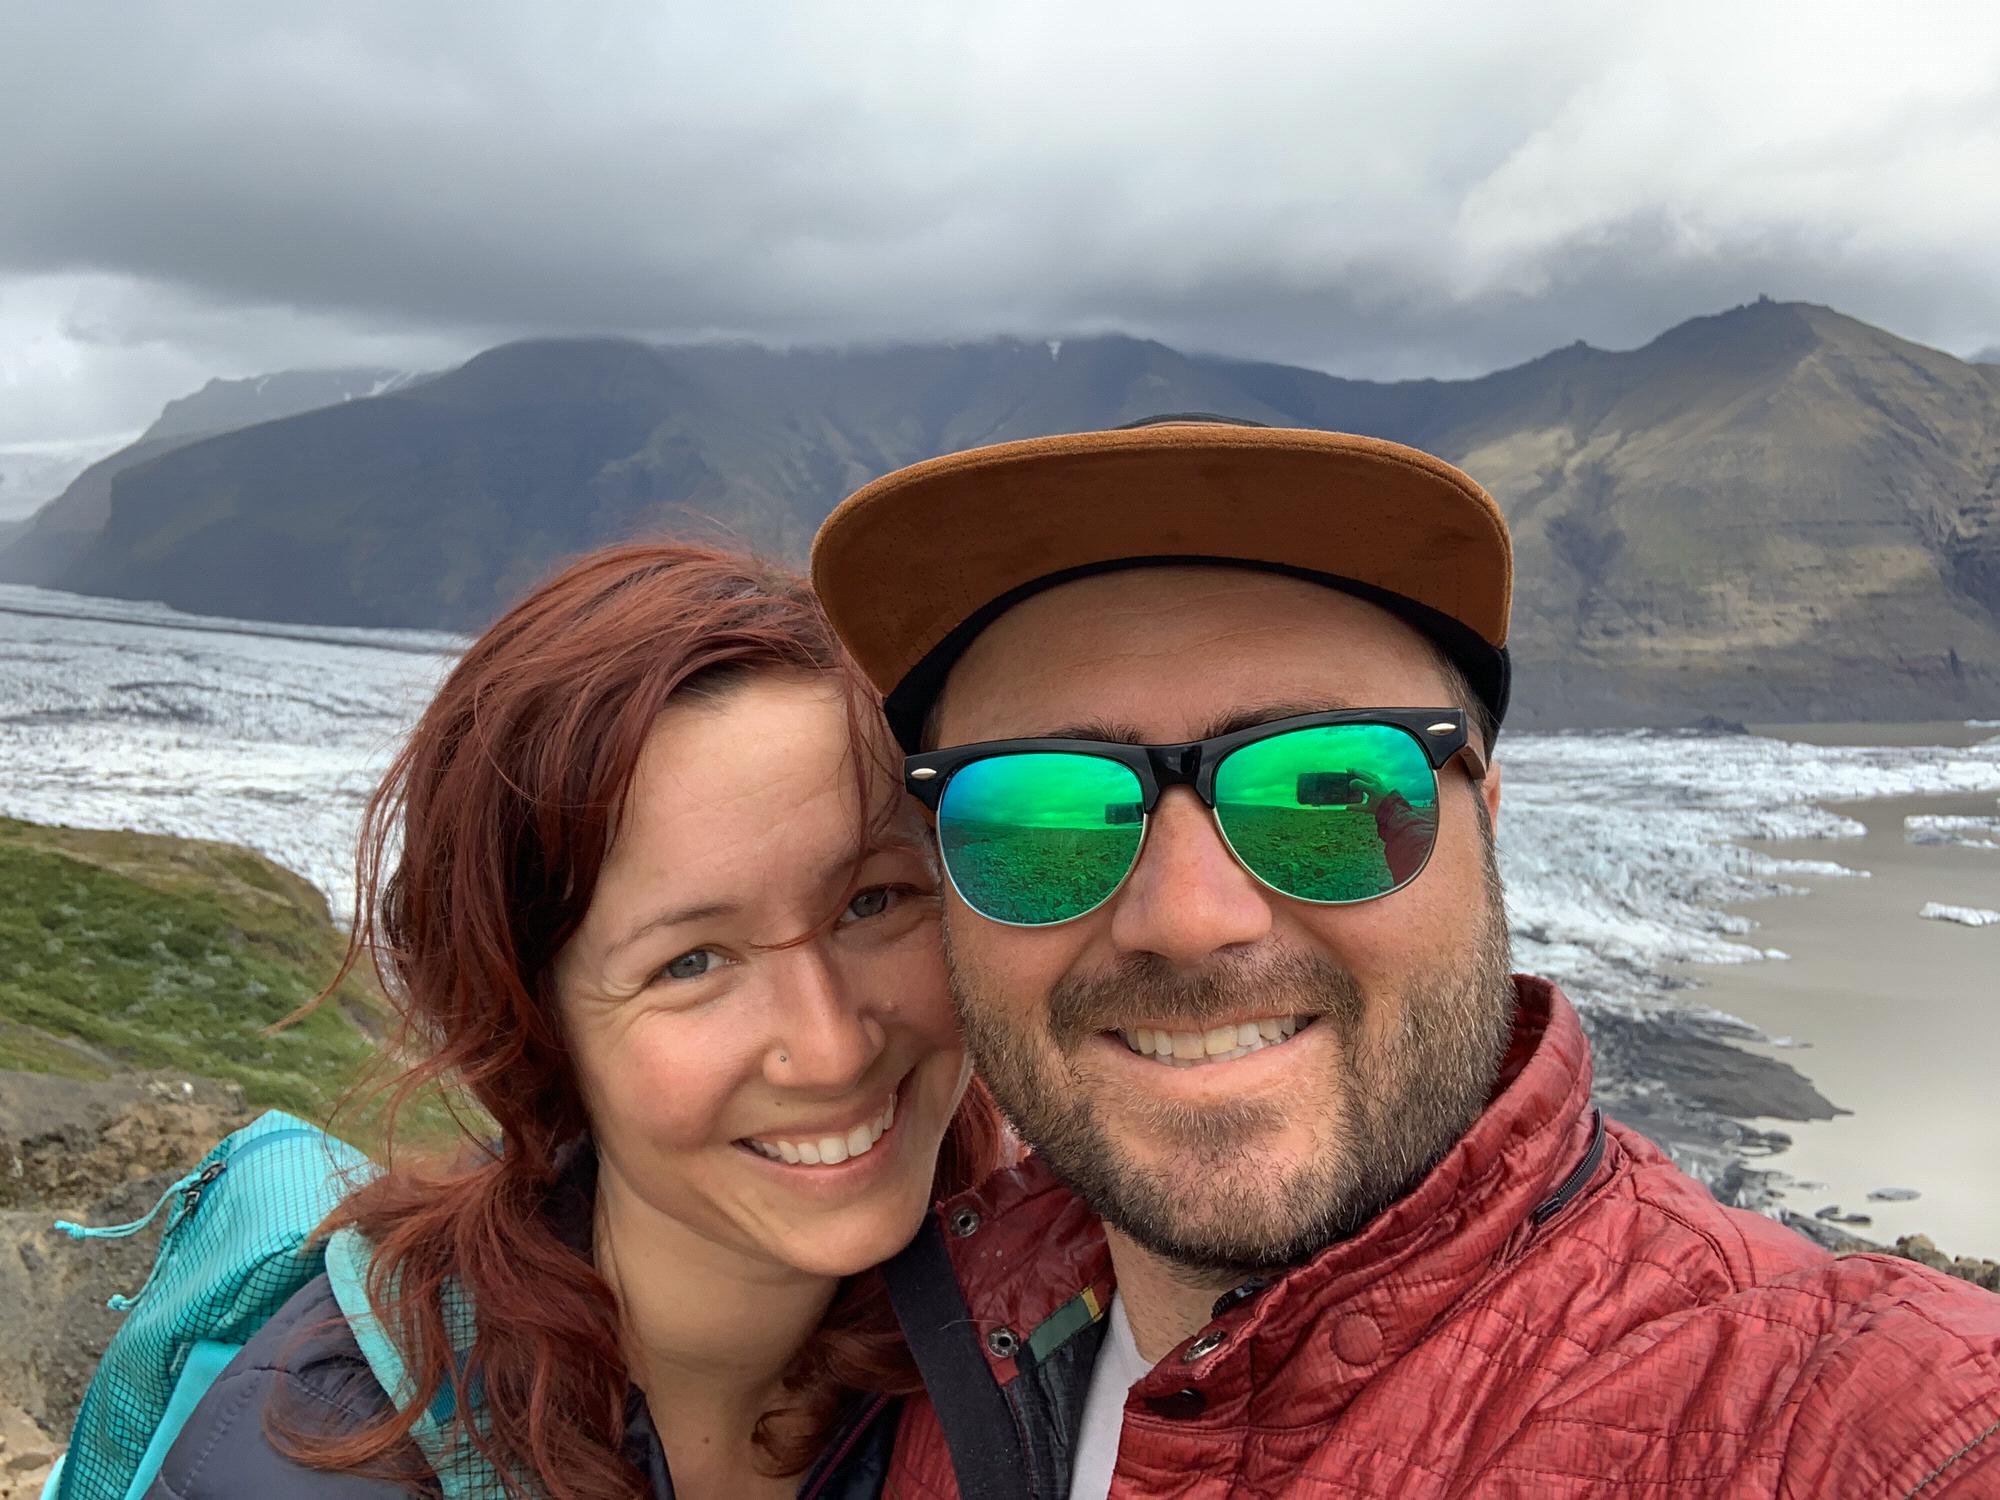 Hiked up to the see the glacier on our trip to Iceland